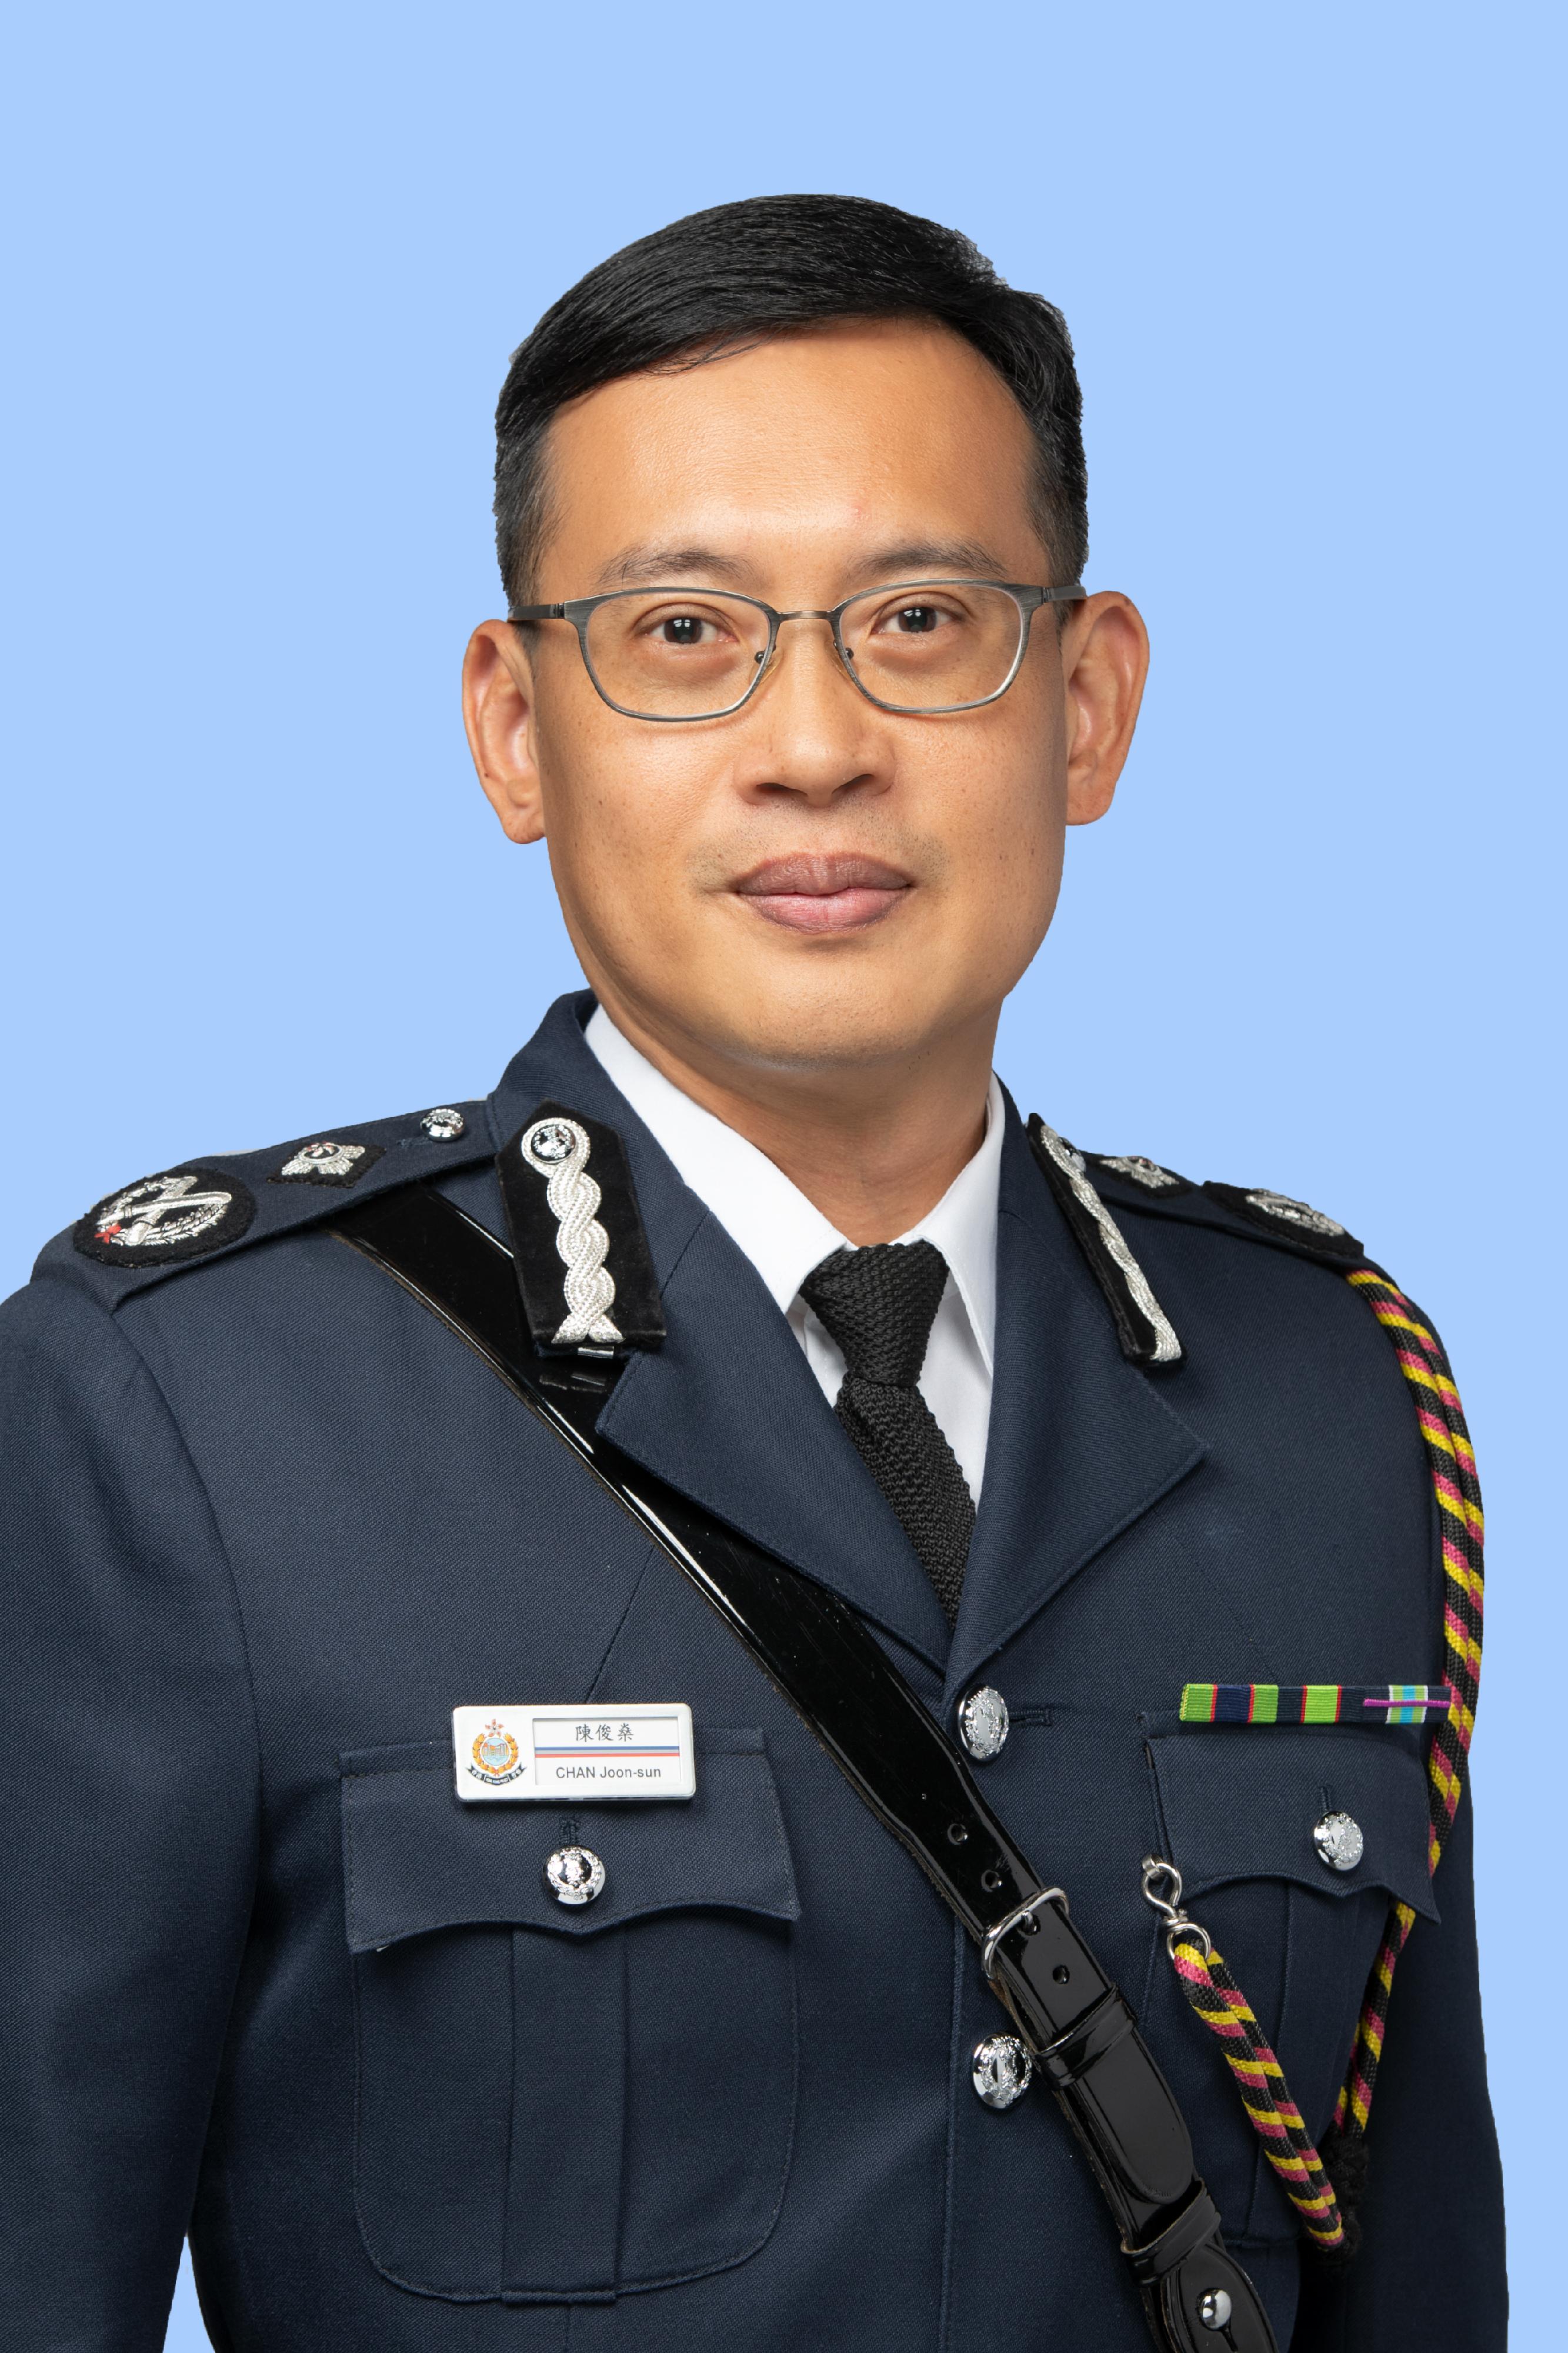 Approval has been given for the appointment of the Senior Assistant Commissioner of Police, Mr Chan Joon-sun, as Deputy Commissioner of Police (Management) with effect from August 16, 2023.